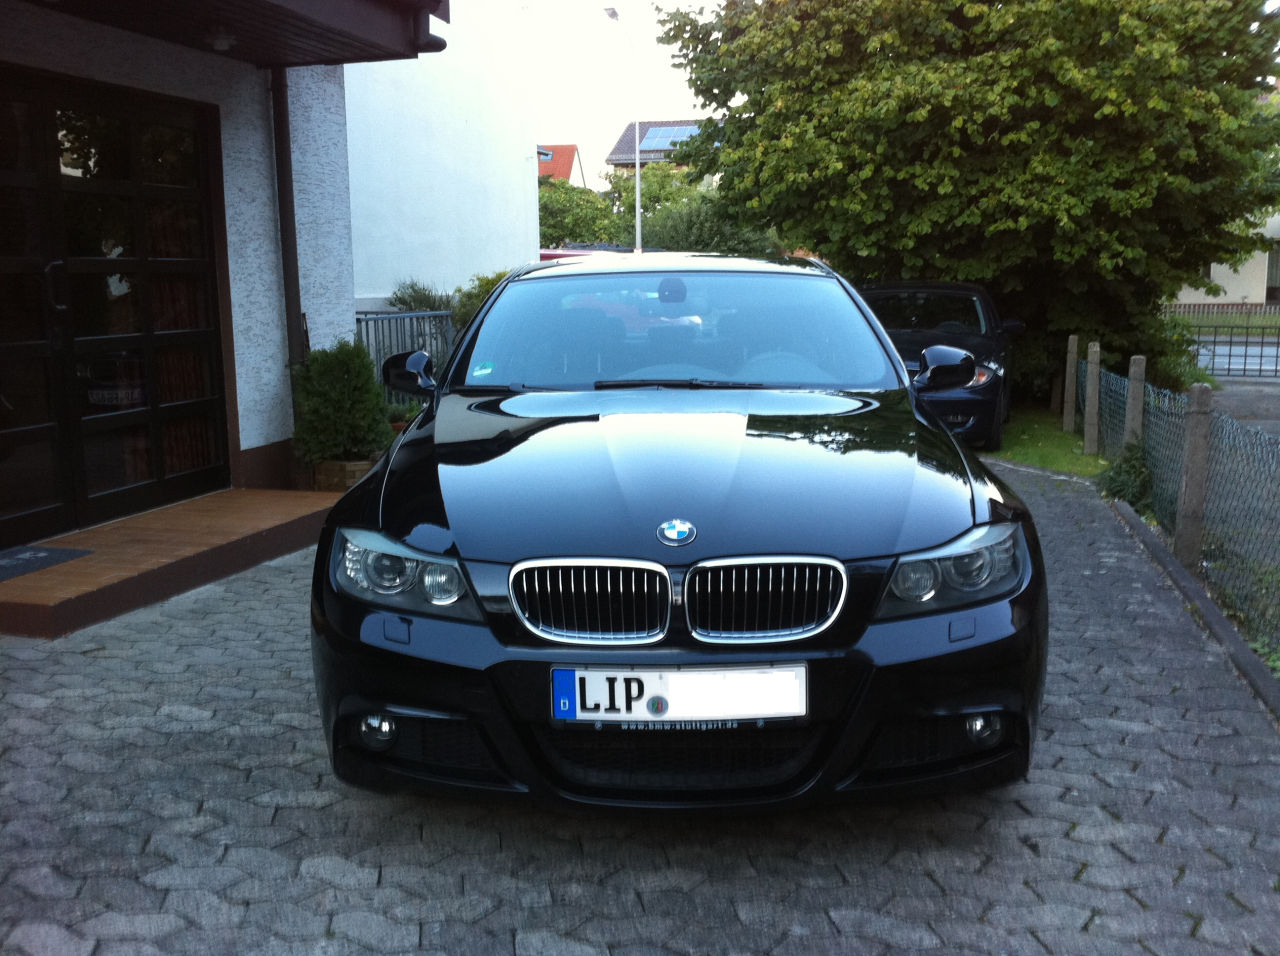 2008 Bmw 330i features #3